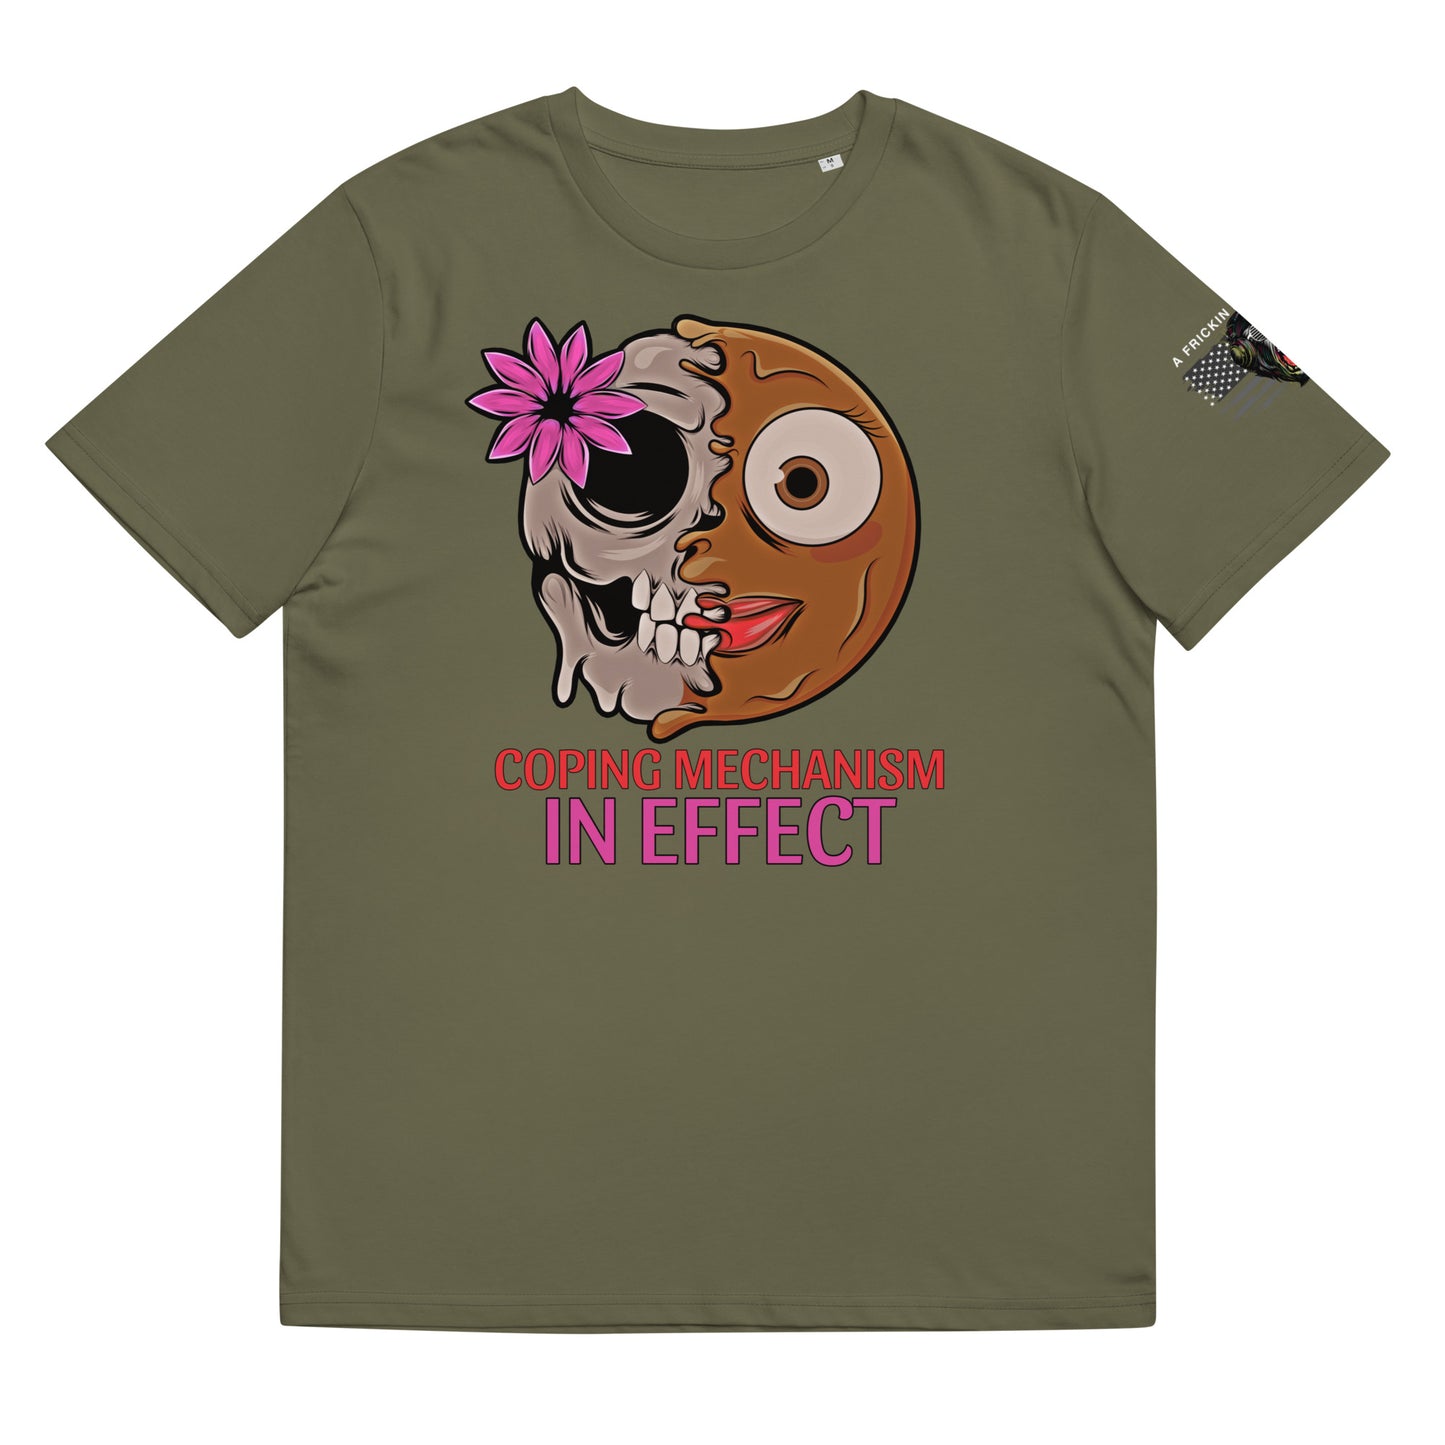 Coping Mechanism in Effect One Unisex organic cotton t-shirt